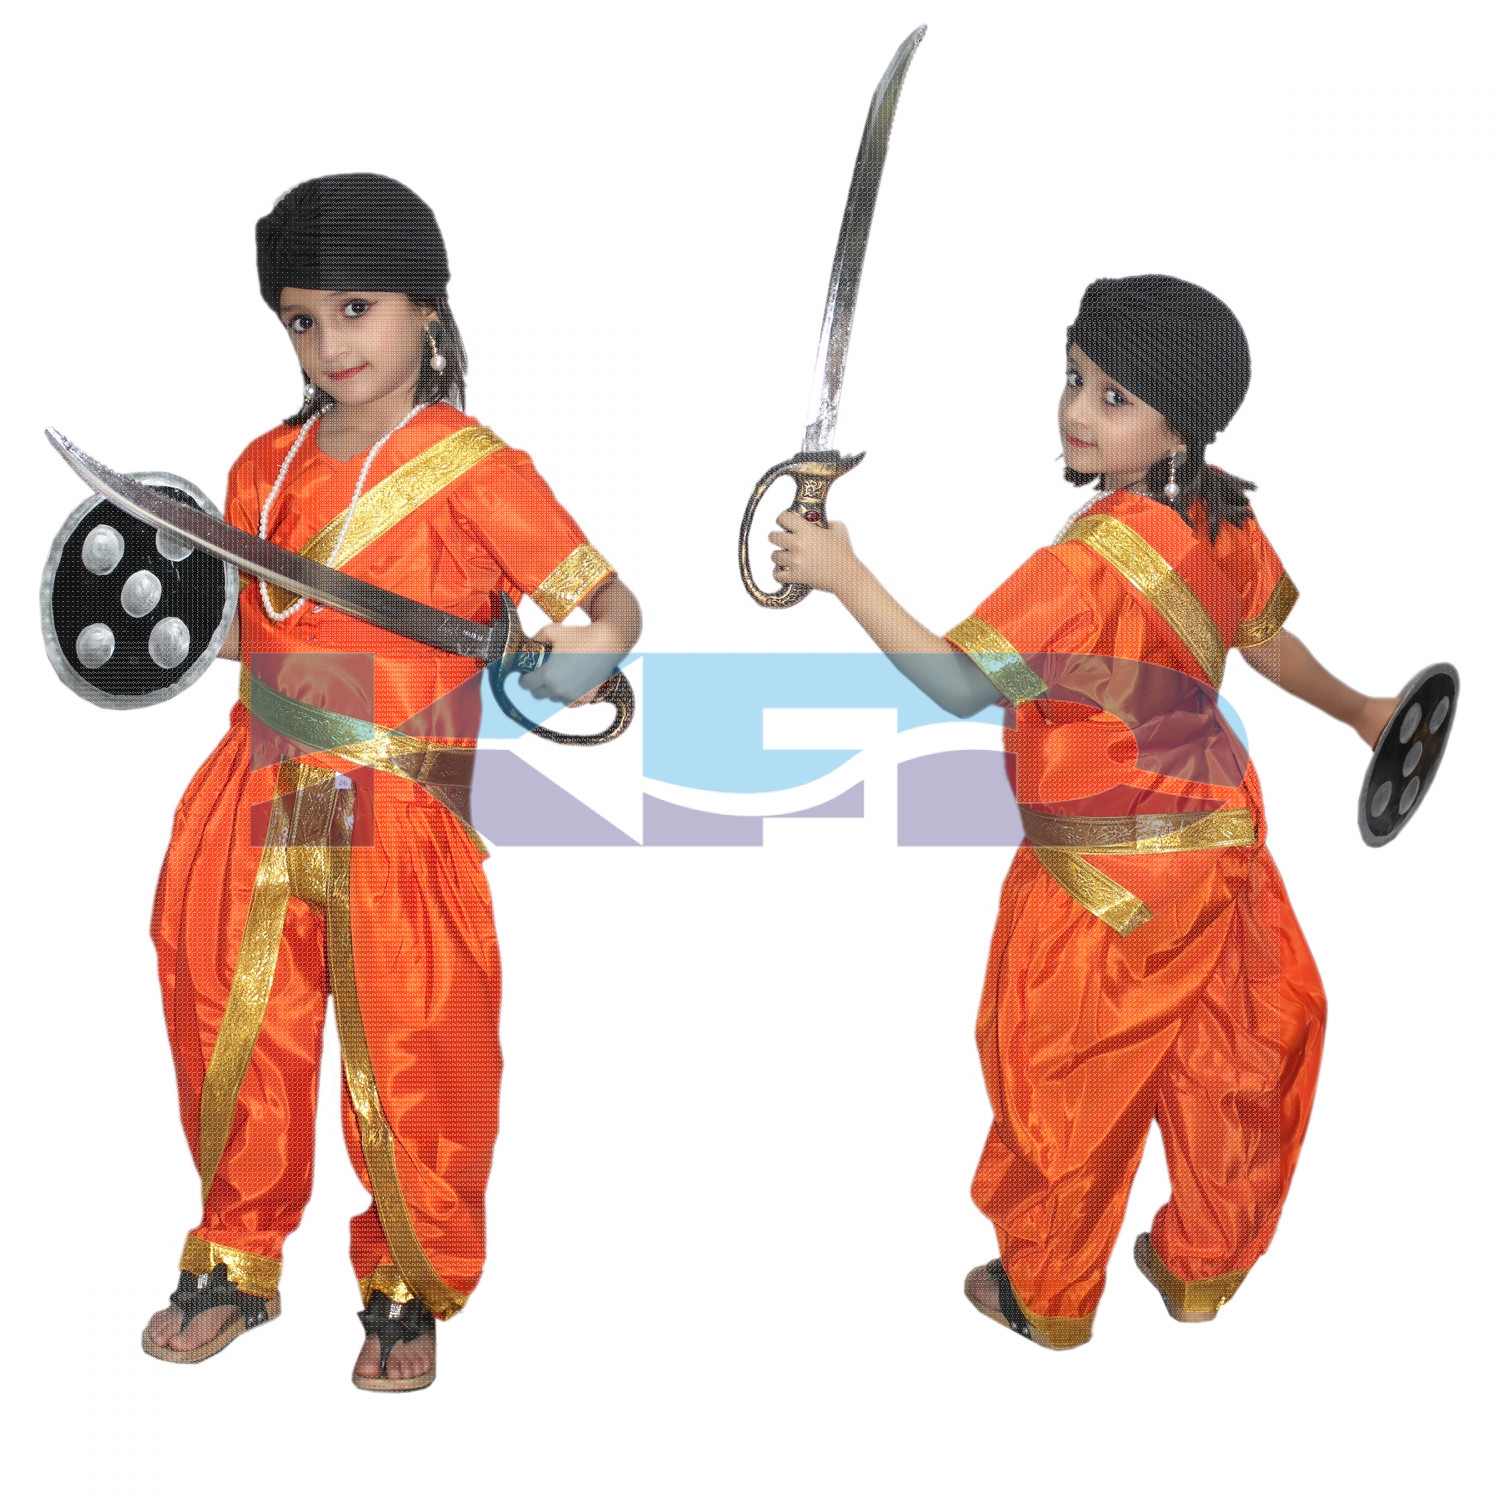 Rani Laxmi Bai Orange National Hero/freedom fighter Costume for Independence Day/Republic Day/Annual function/theme party/Competition/Stage Shows Dress